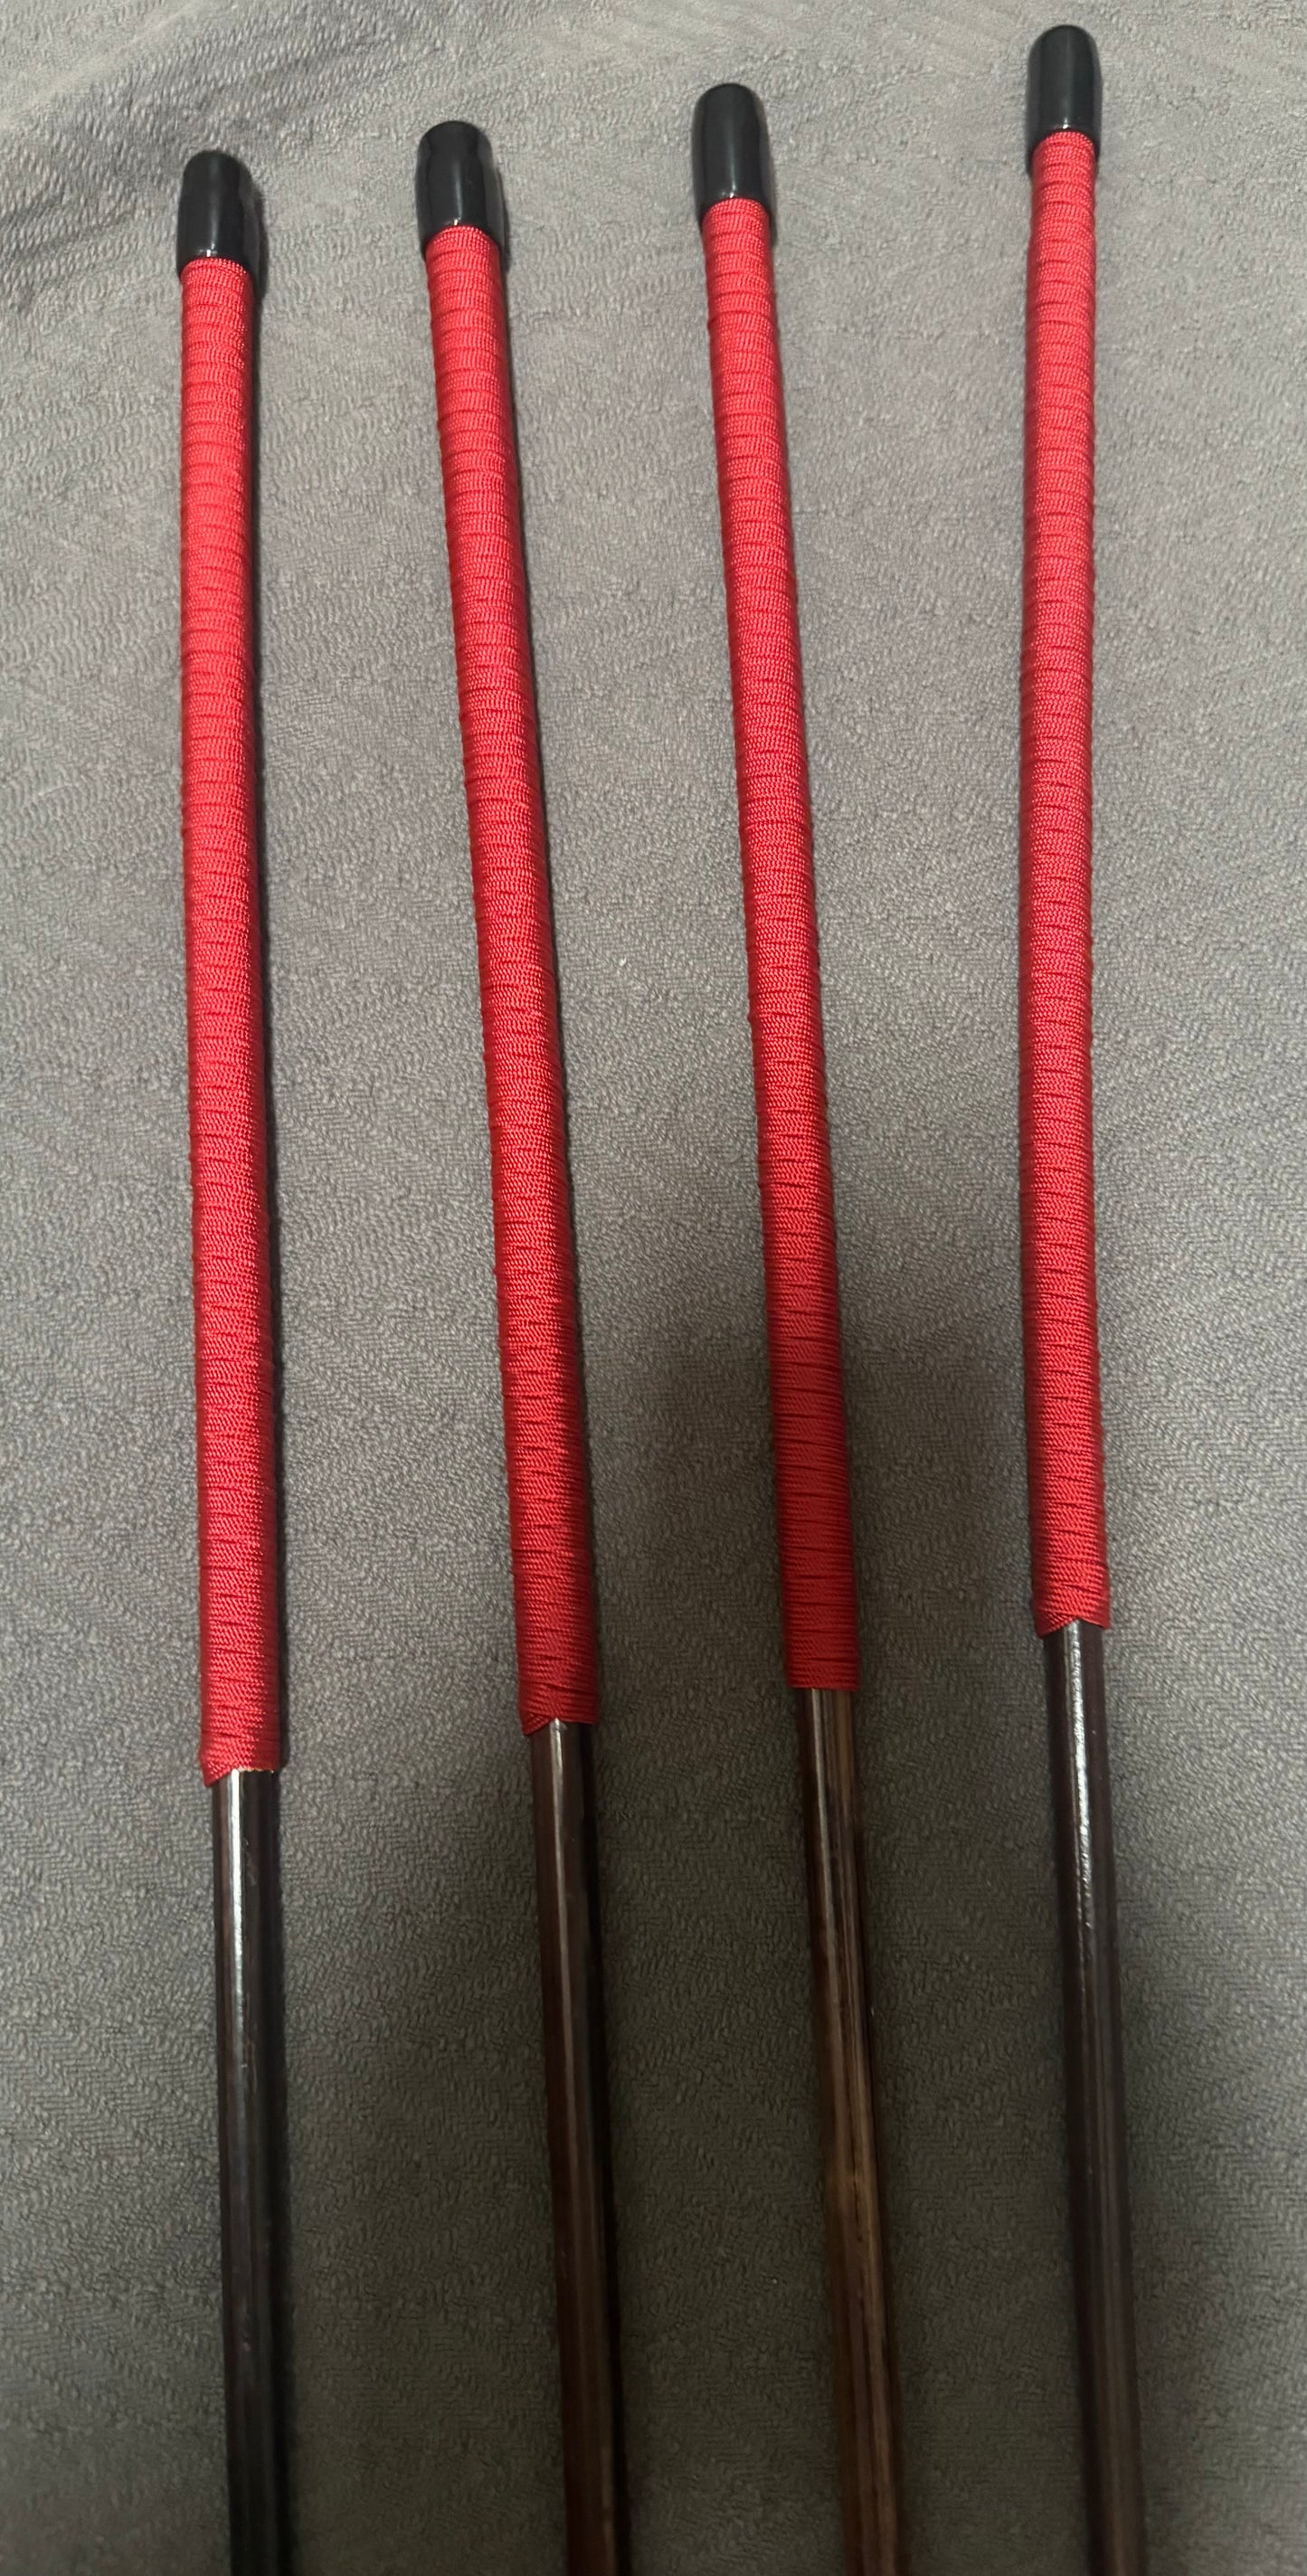 Set of 4 Whippy Swishy Thin Smoked Dragon Canes / Falaka Canes - 90 cms L & 8 - 10 mm D - Imperial Red Paracord Handles - Englishvice Canes